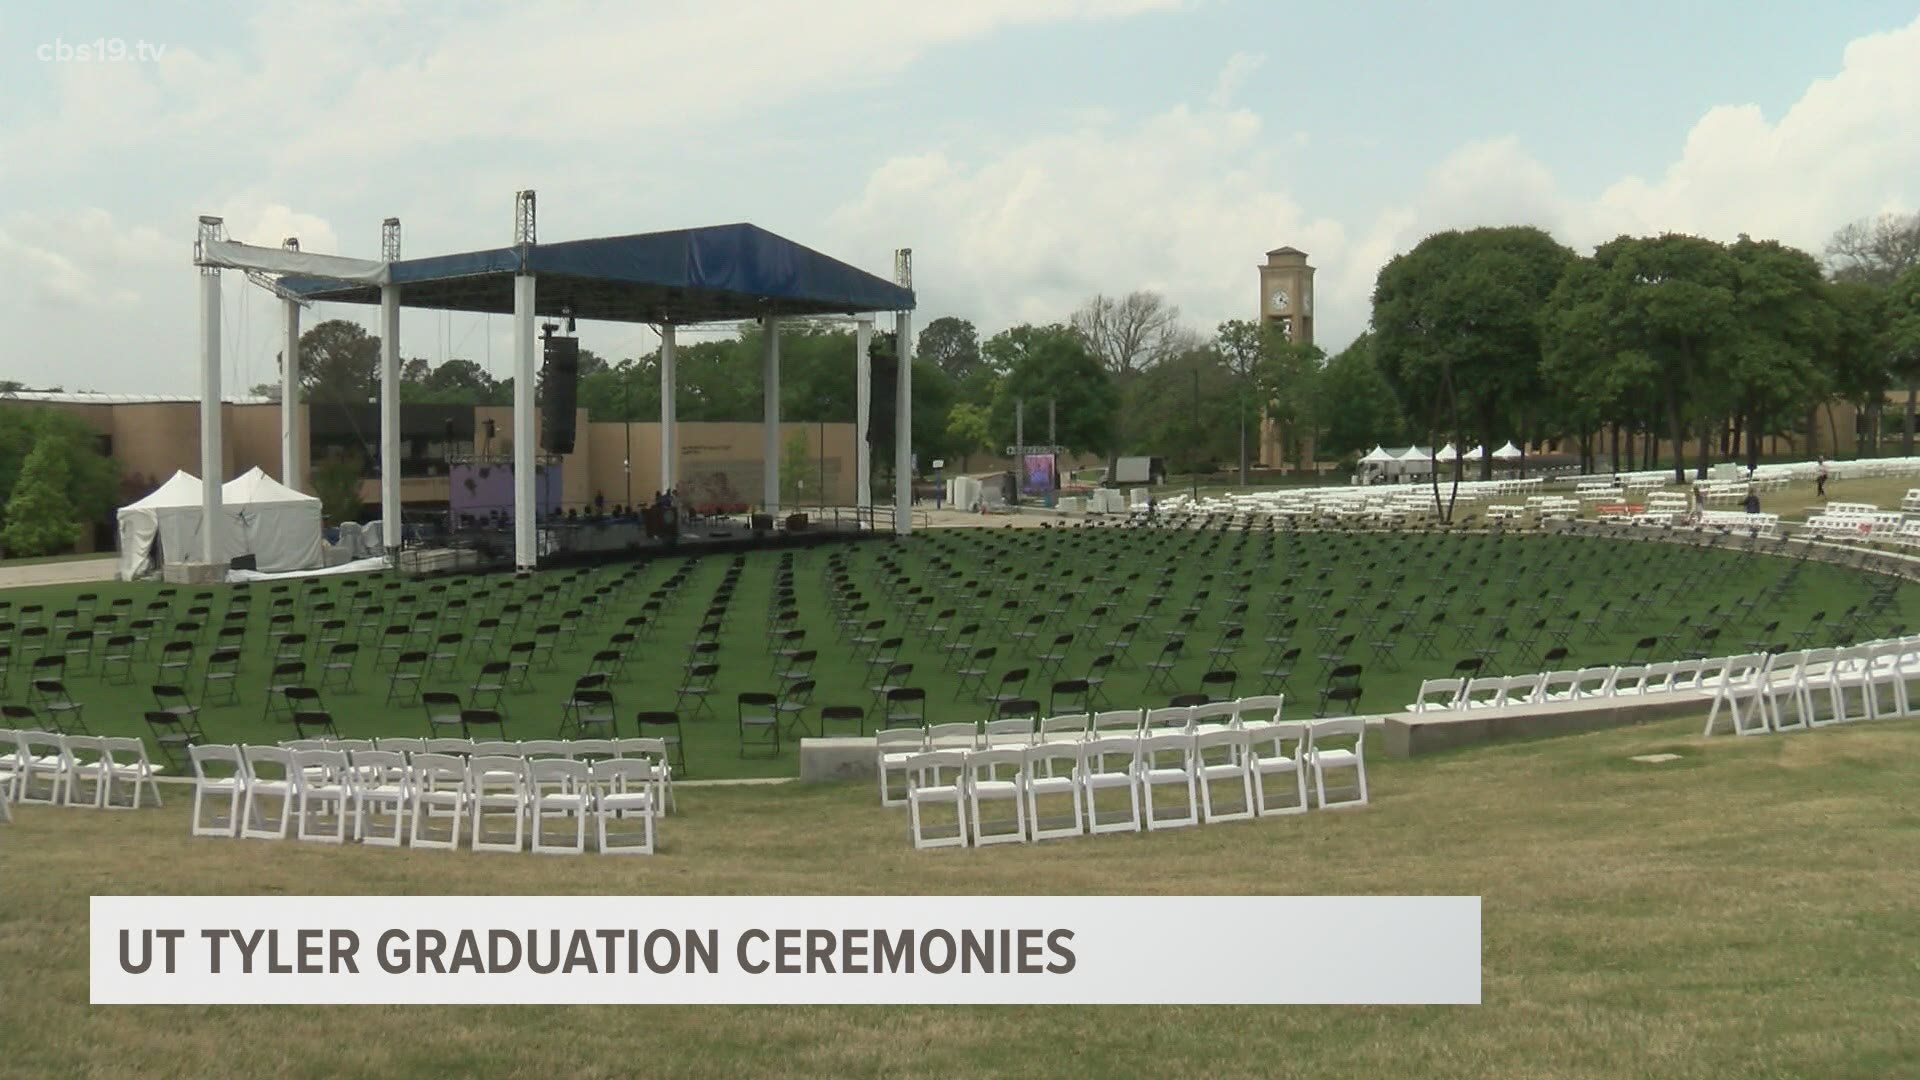 With COVID-19 guidelines in place, graduating Patriots will get their time to shine in the university's first-ever outdoor commencement celebration.